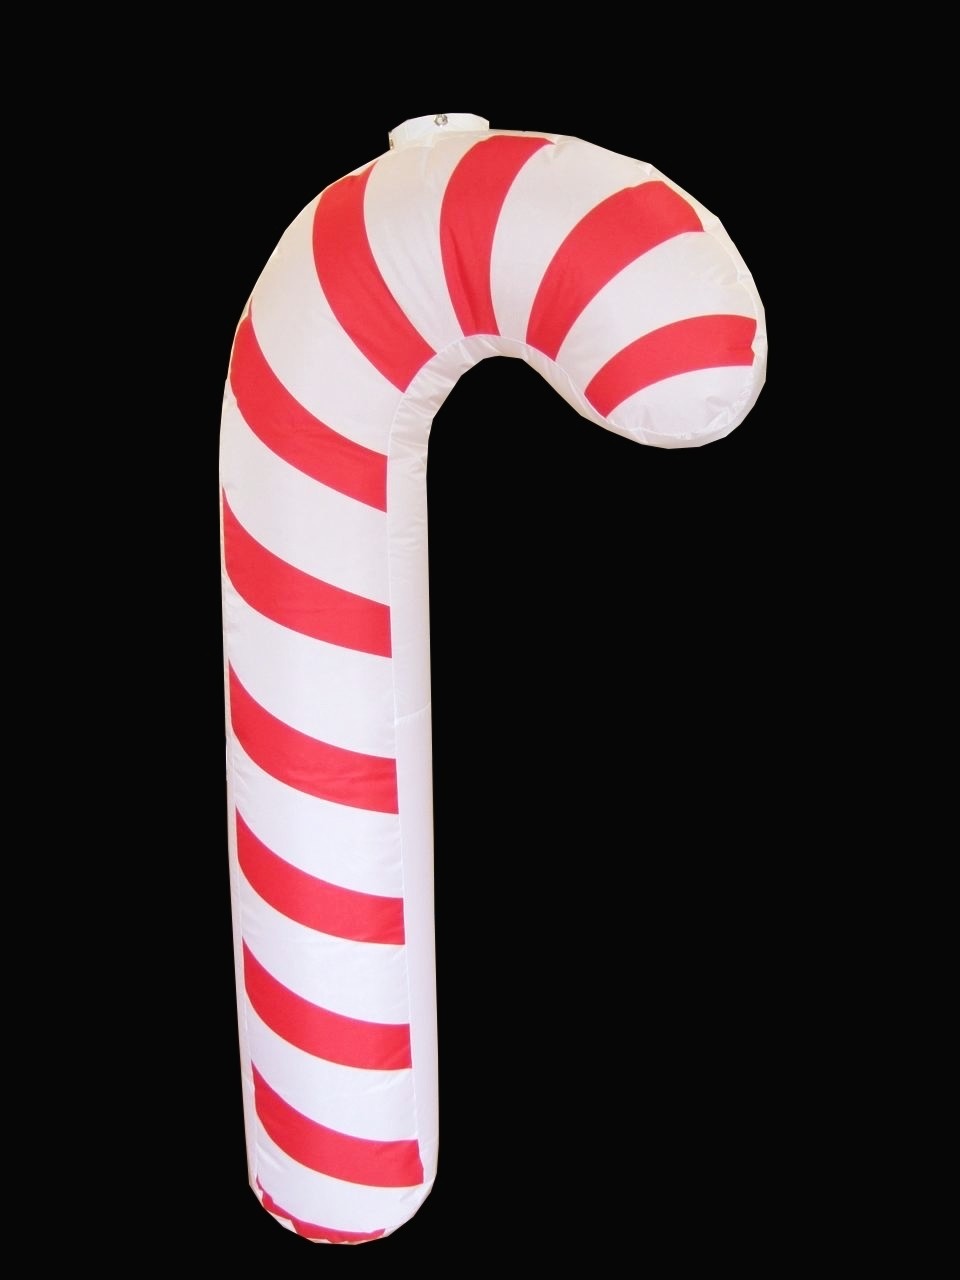 Hanging Inflatable Candy Cane 3.4ft/105cm x 7ft/214cm